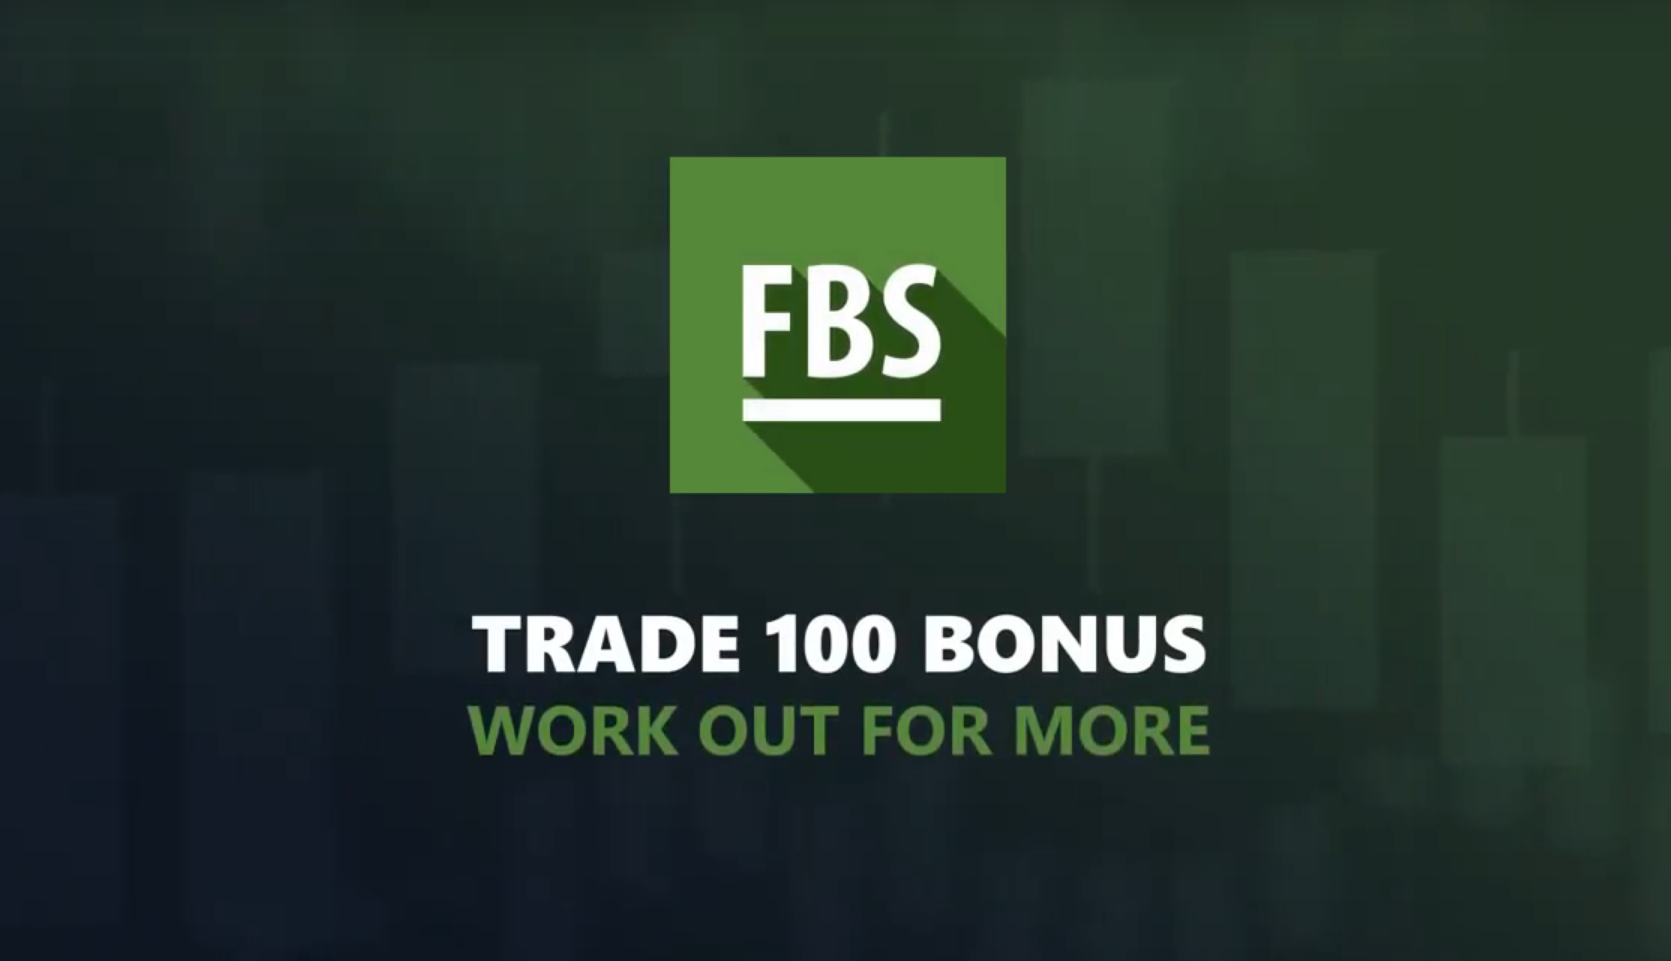 Watch: FBS Trade Forex Without Deposit How To Use MT5 & Trade $100 Bonus